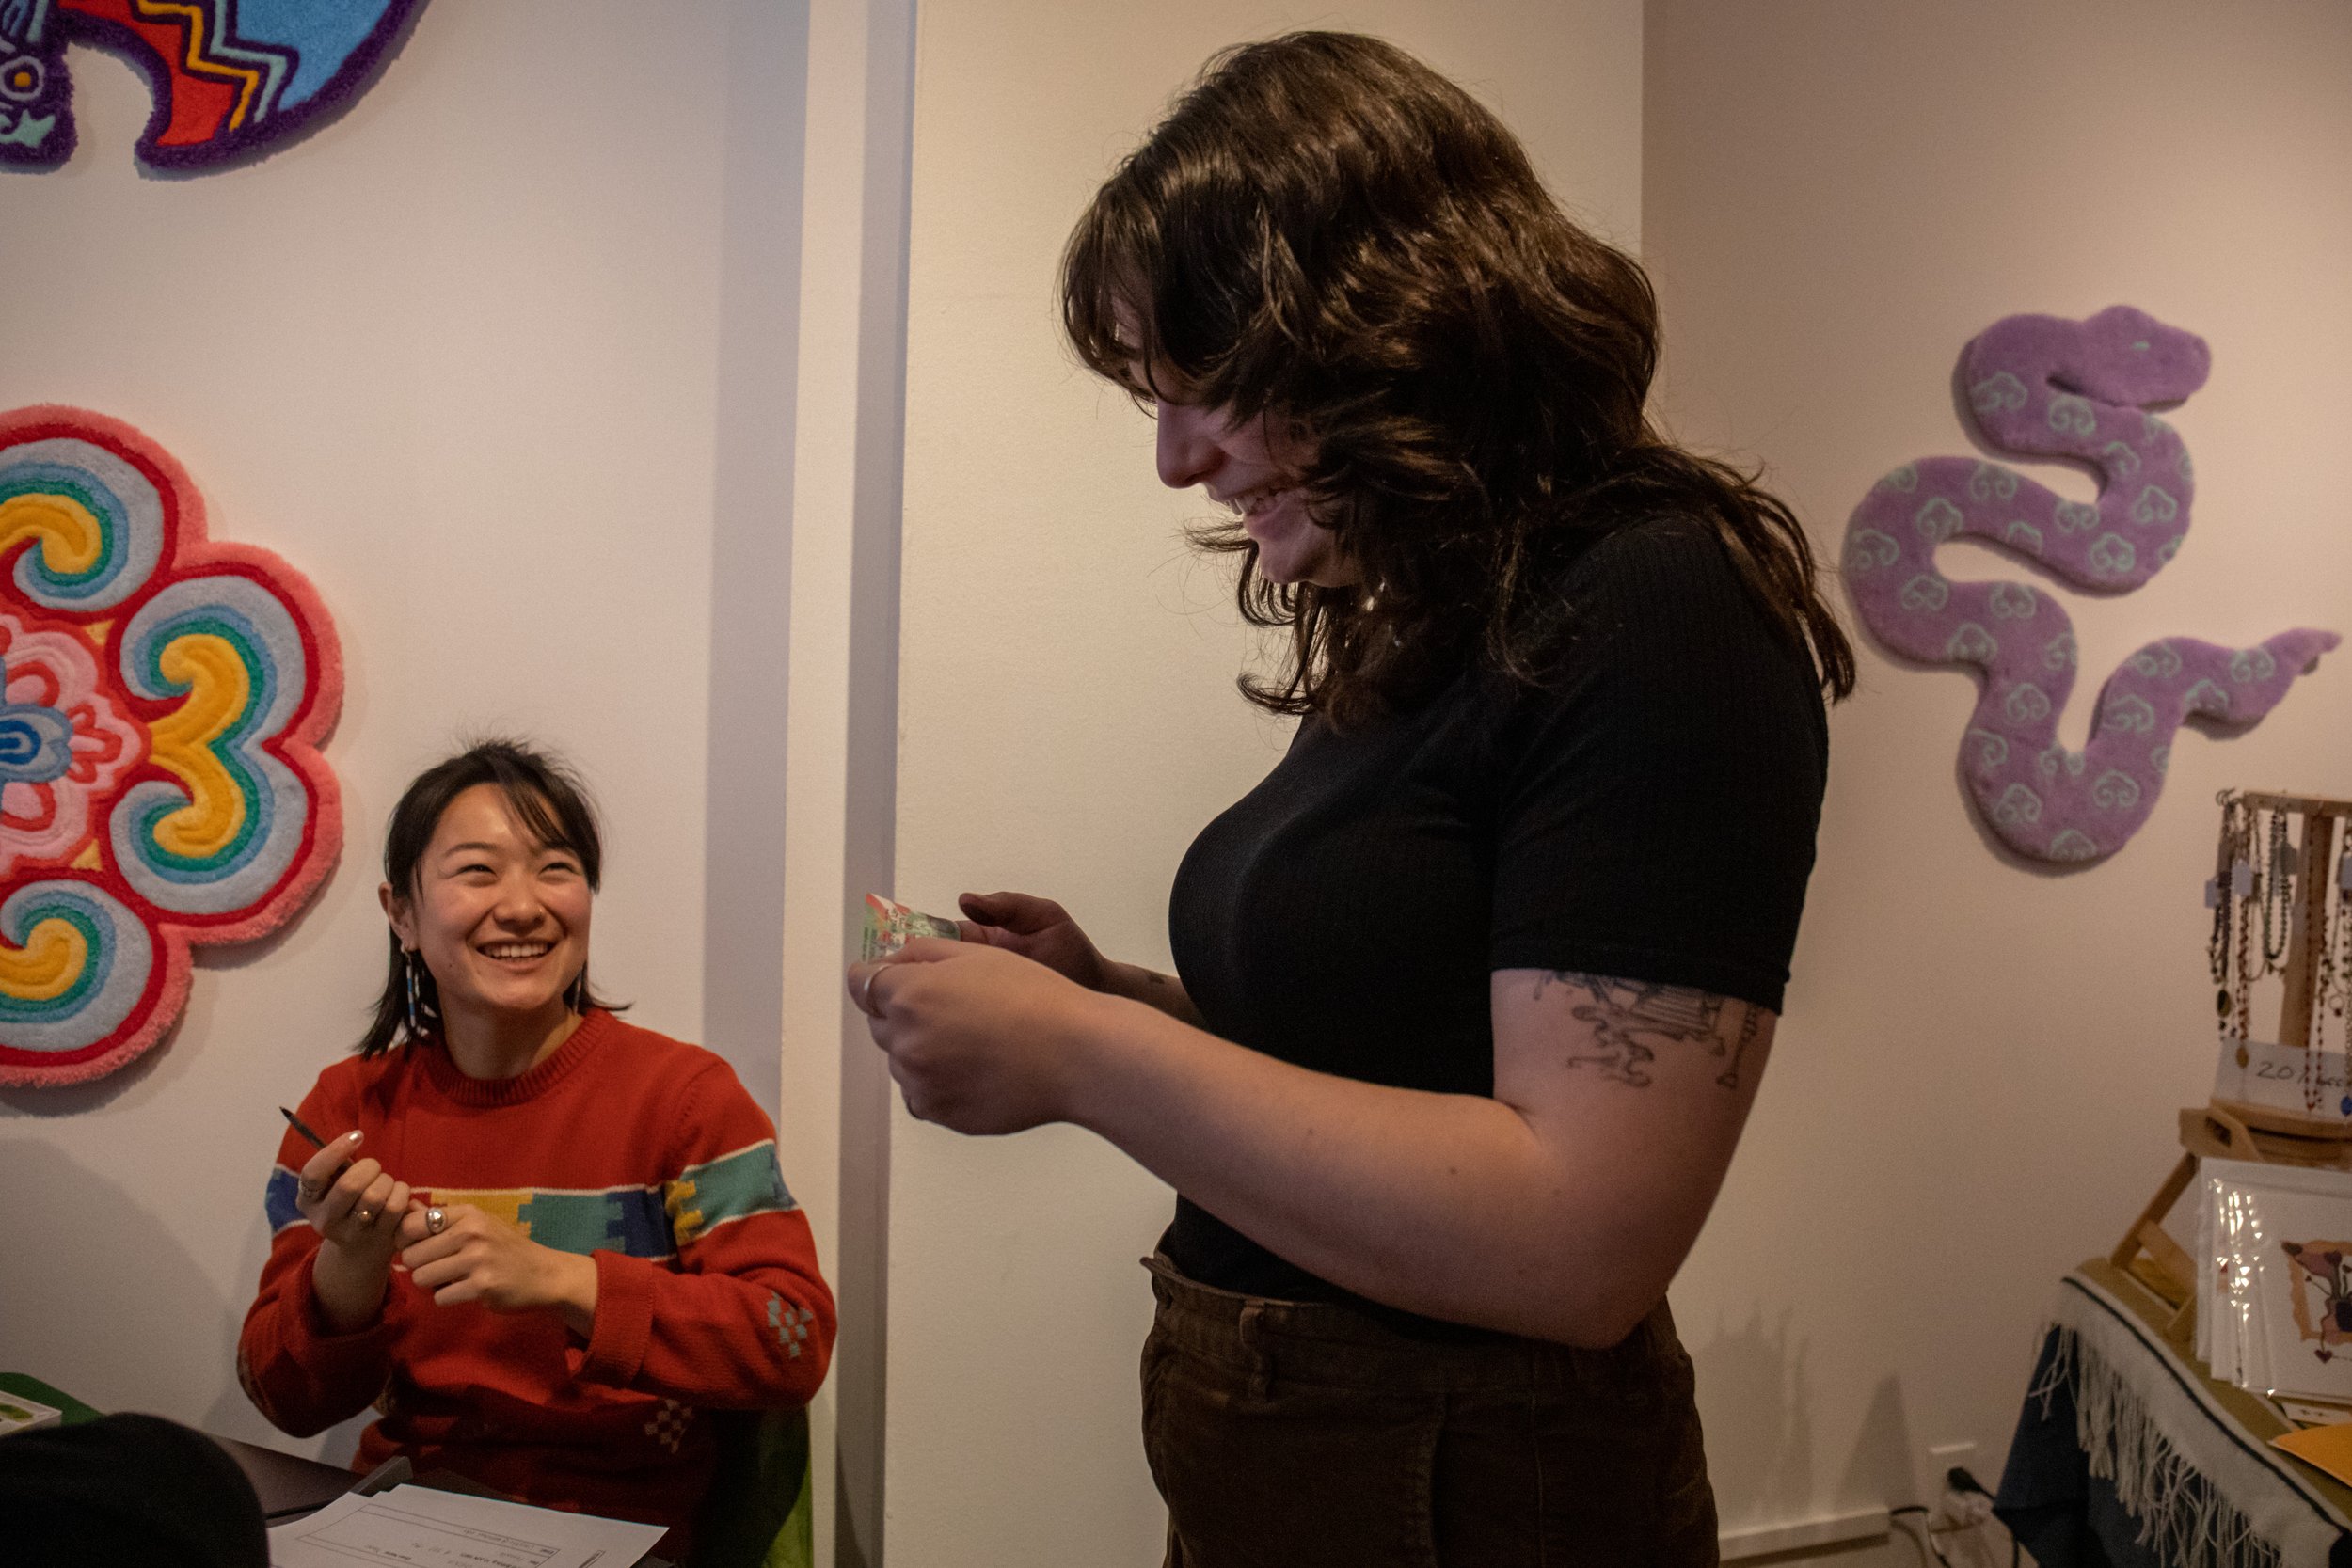  Leah Plante-Wiener smiles as Youkun Zhou hands her the completed fake green card. Plante-Wiener is from Montreal, Canada and has lived in NY for four and half years. 